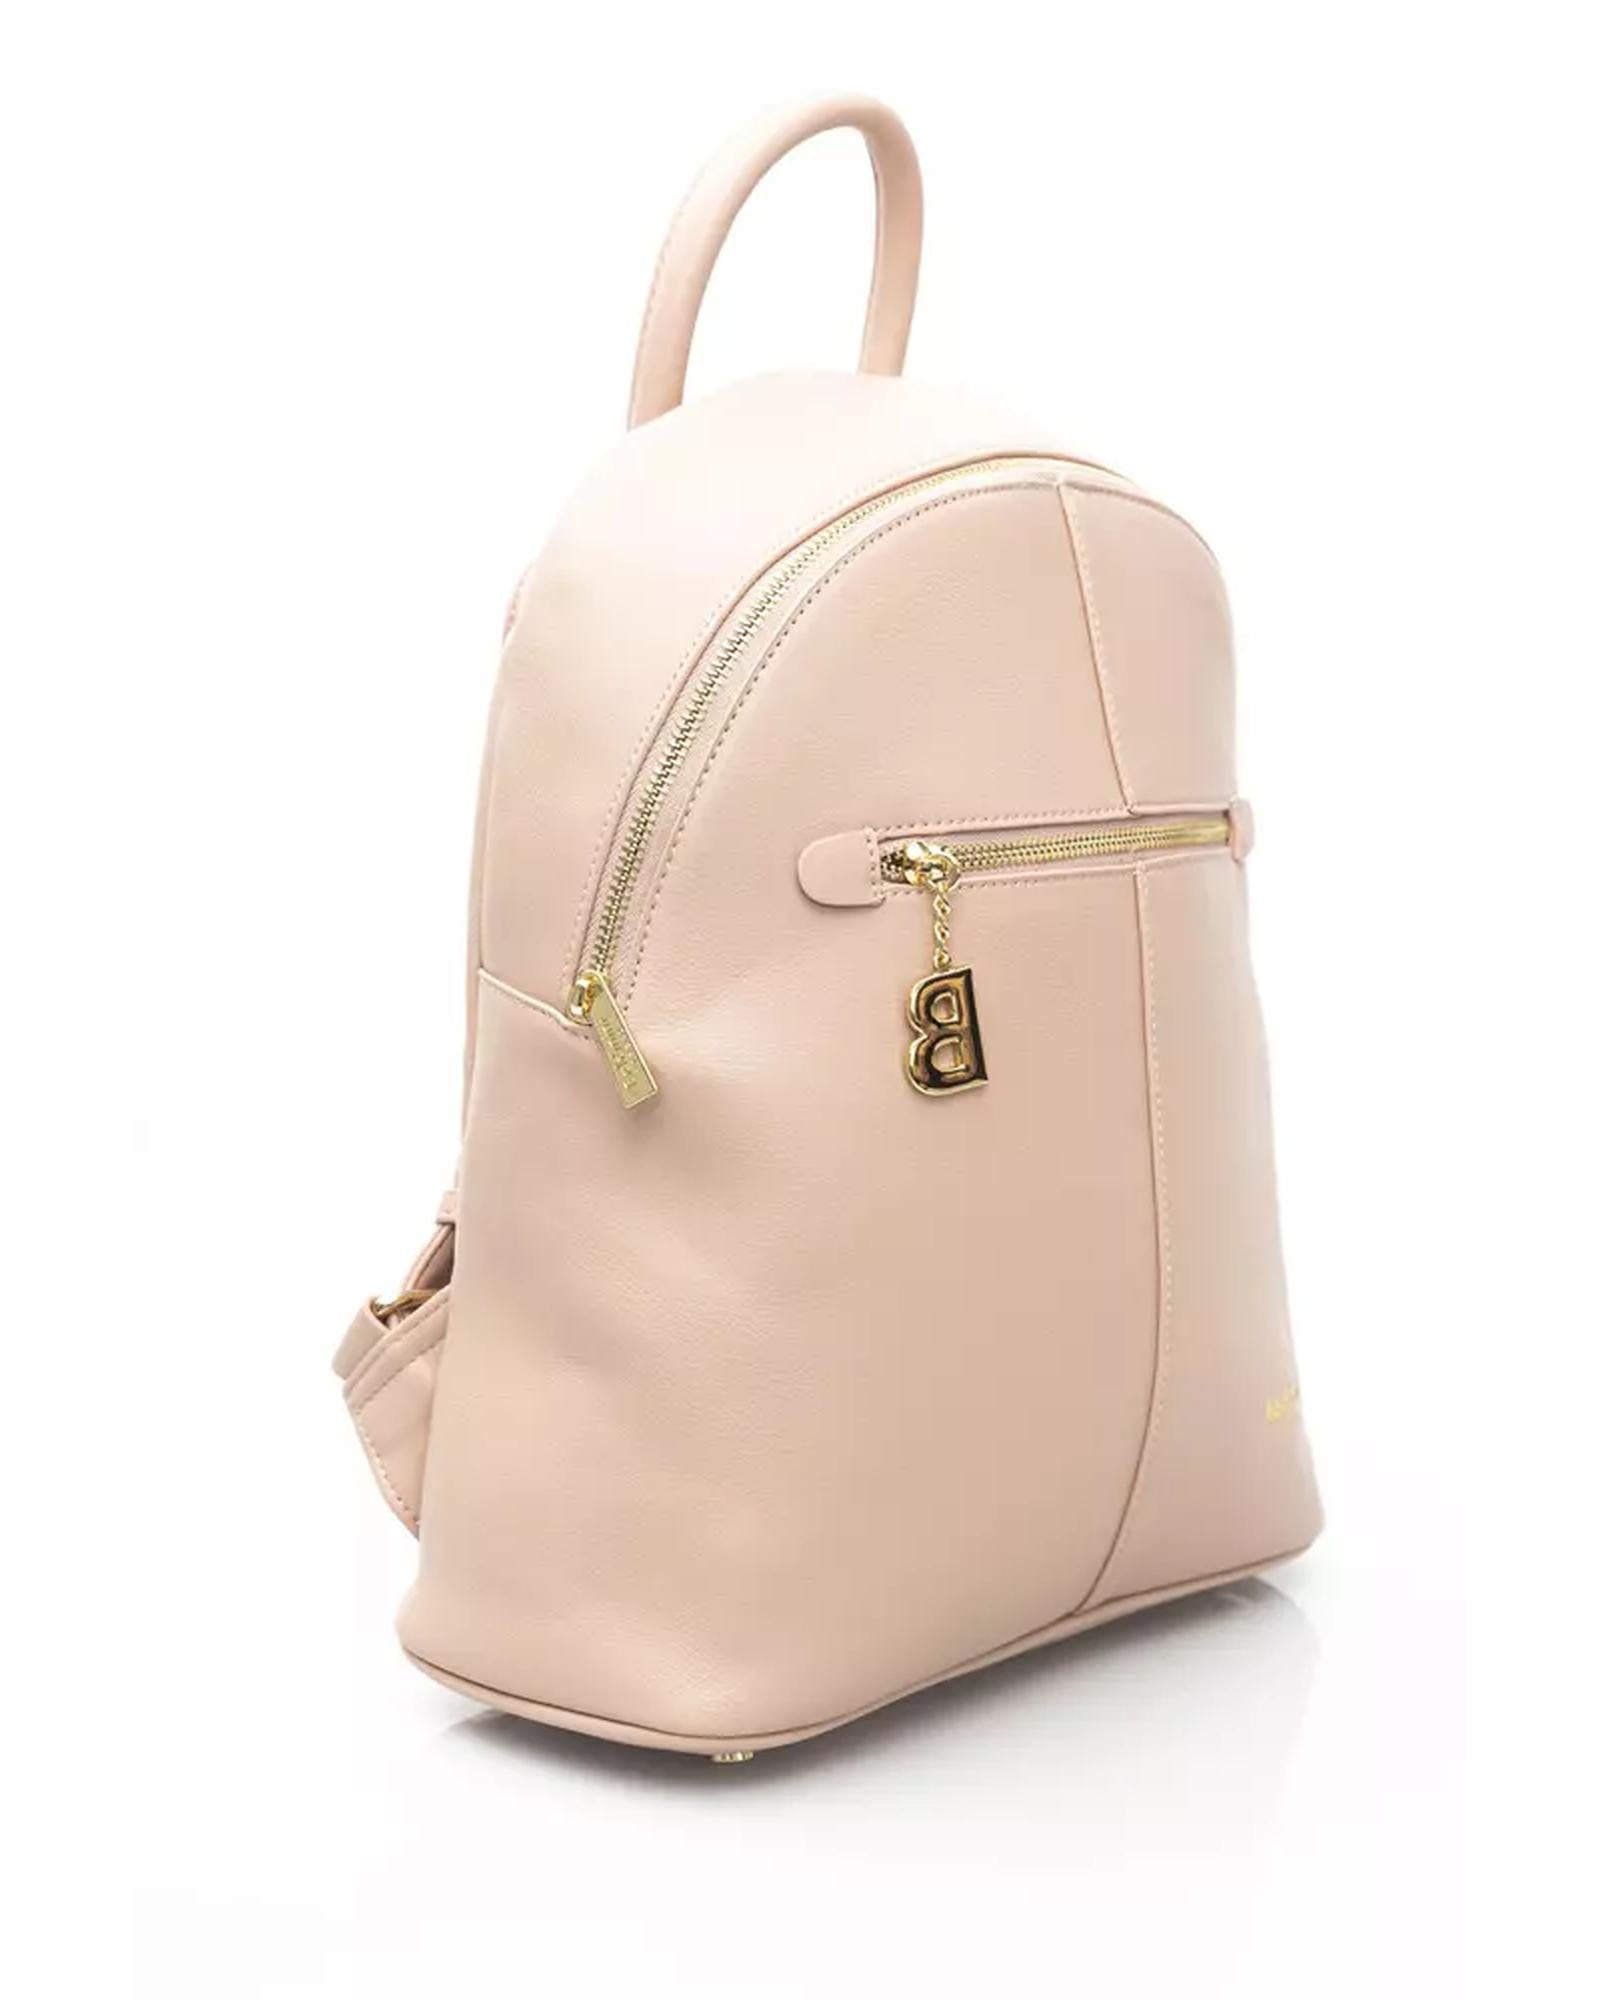 Zip Closure Backpack with Internal Compartments and Front Pocket One Size Women